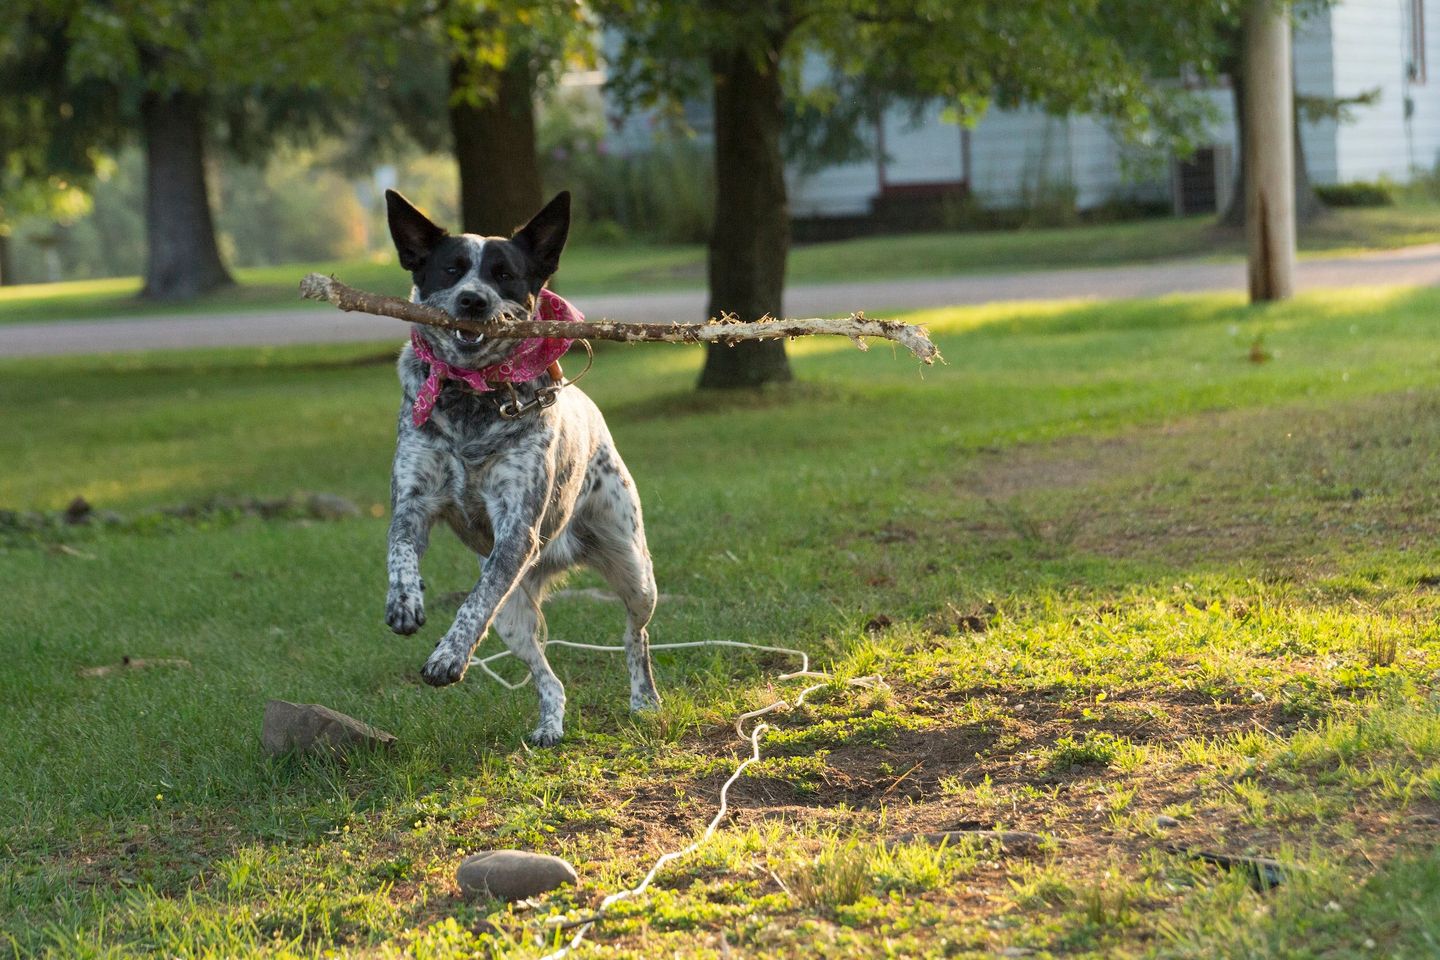 Spice up my life! The ins and outs of canine enrichment